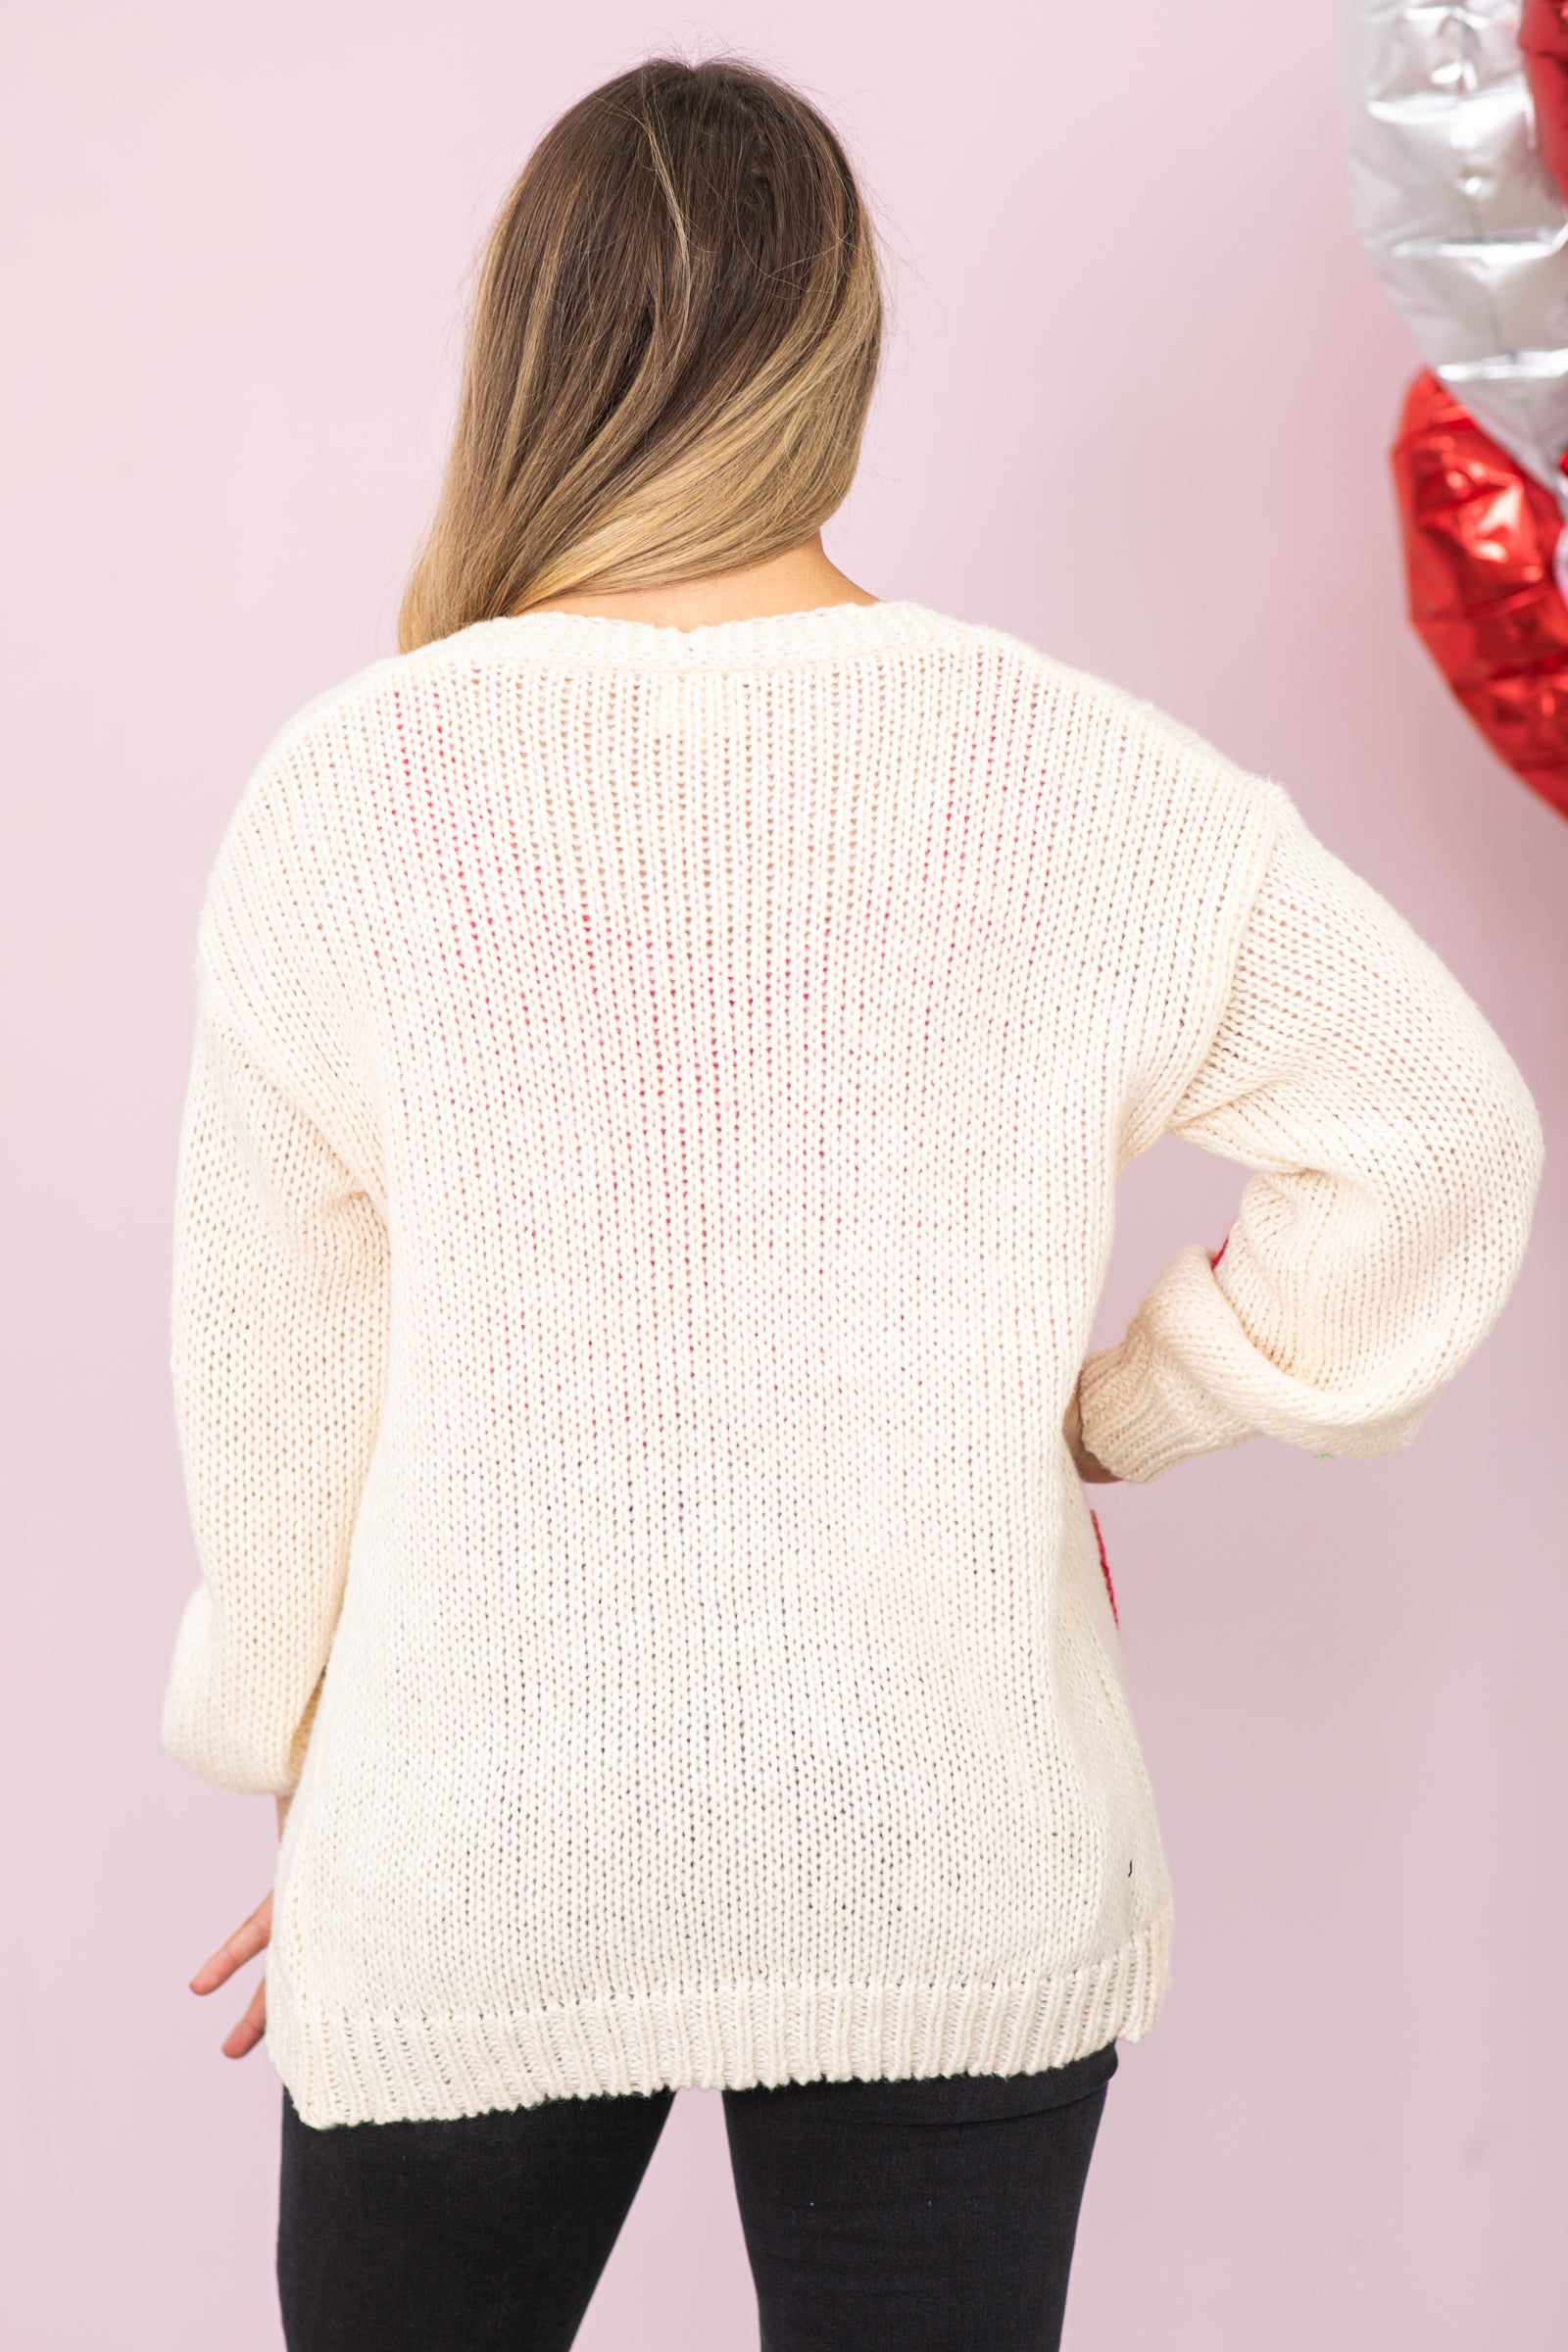 Cream With Red Hearts Cardigan